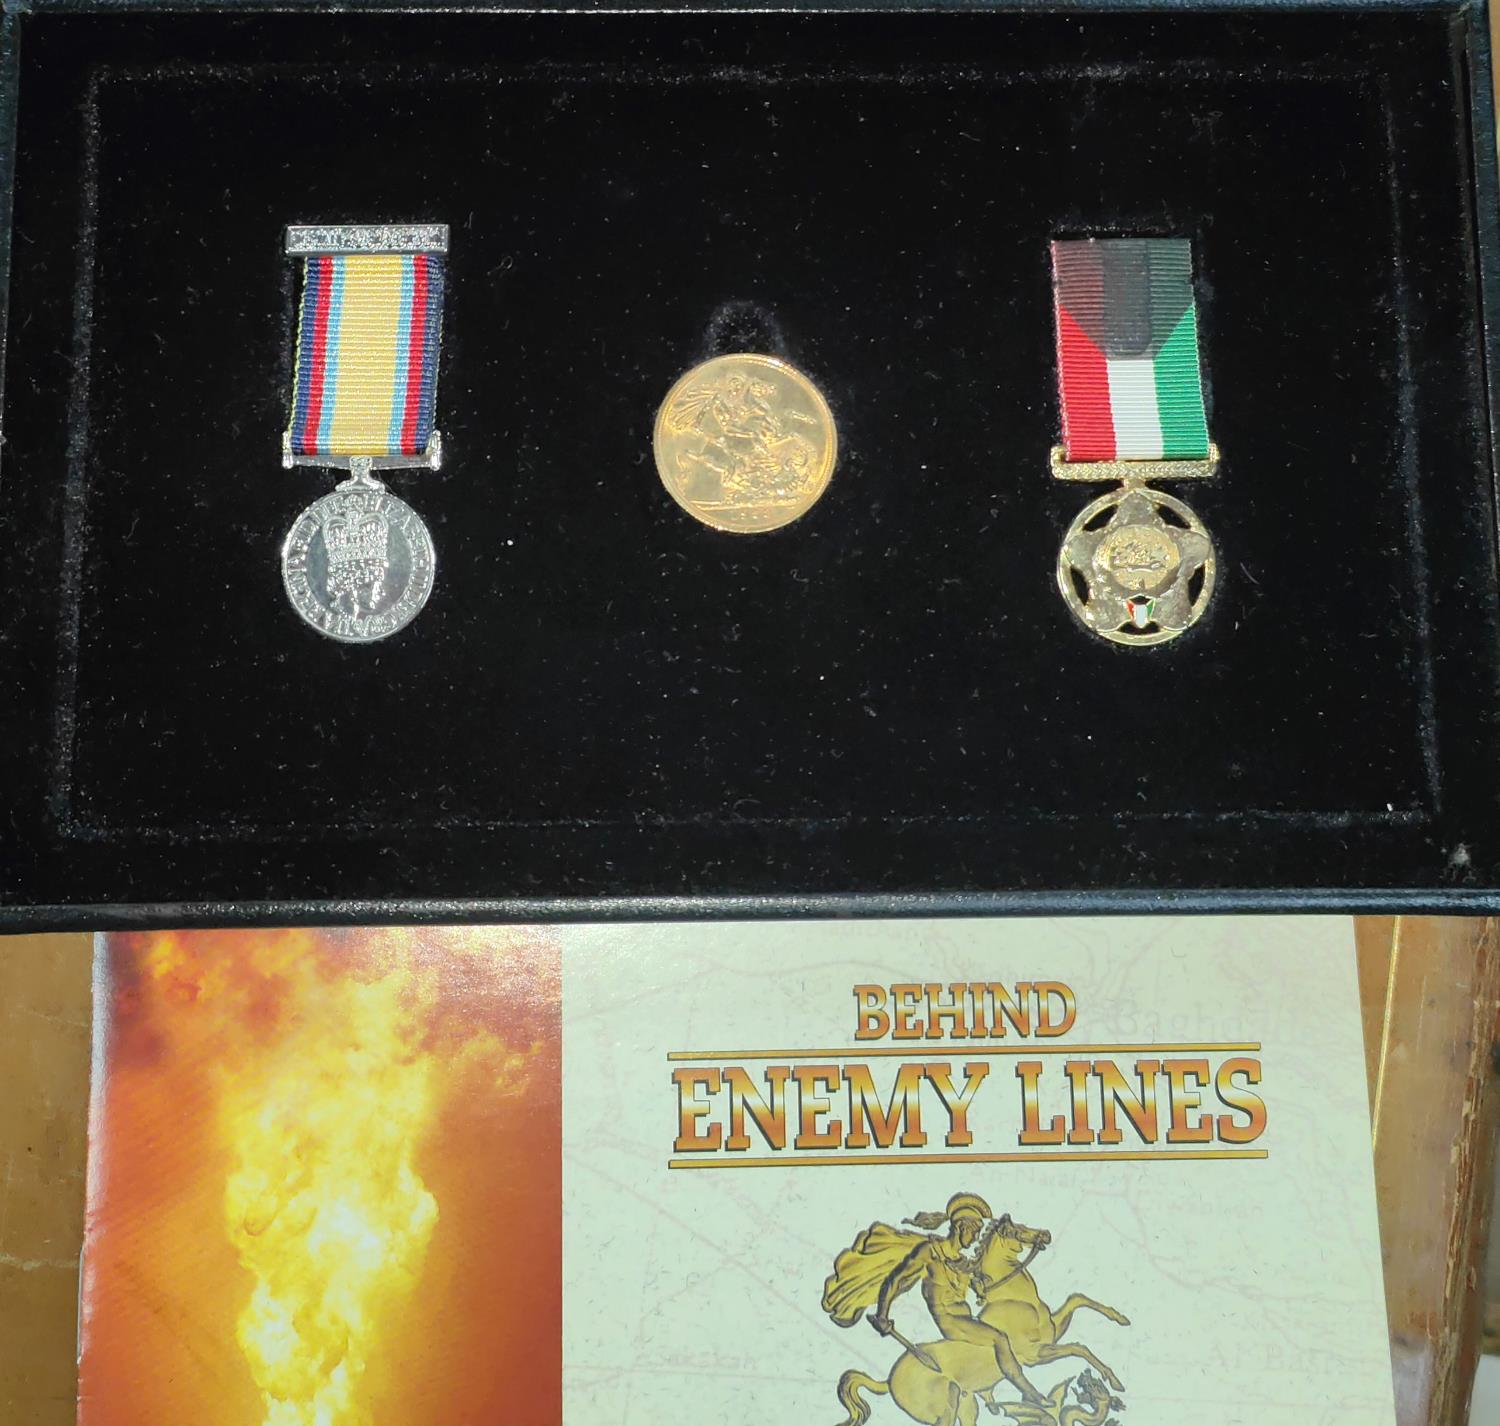 GB: 1958 sovereign, Behind Enemy Lines issue, with 2 miniature medals, cased